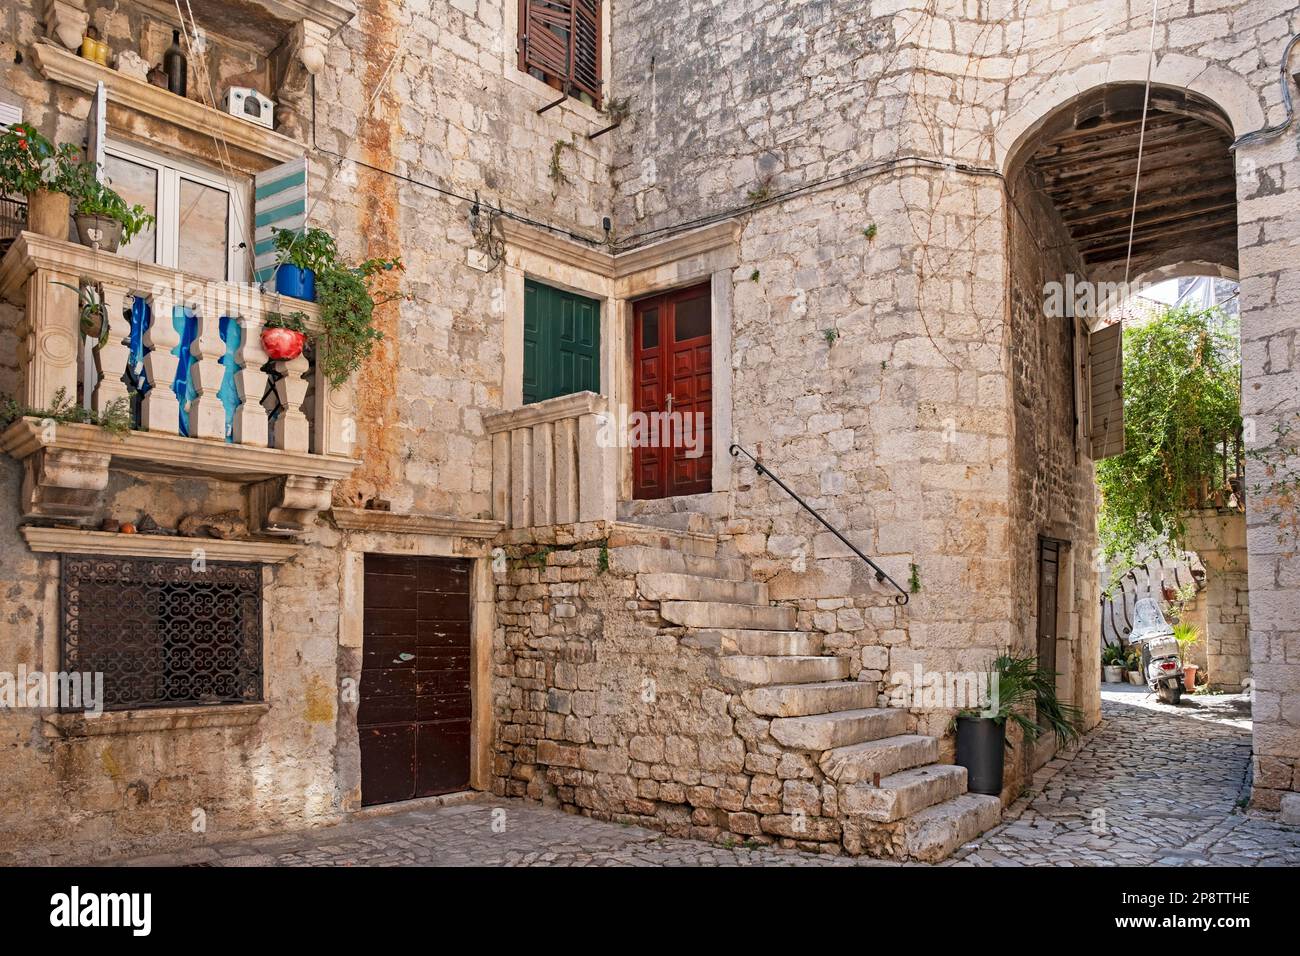 Picturesque medieval house in the historic Old Town of Trogir along the Adriatic Sea, Split-Dalmatia County, Croatia Stock Photo